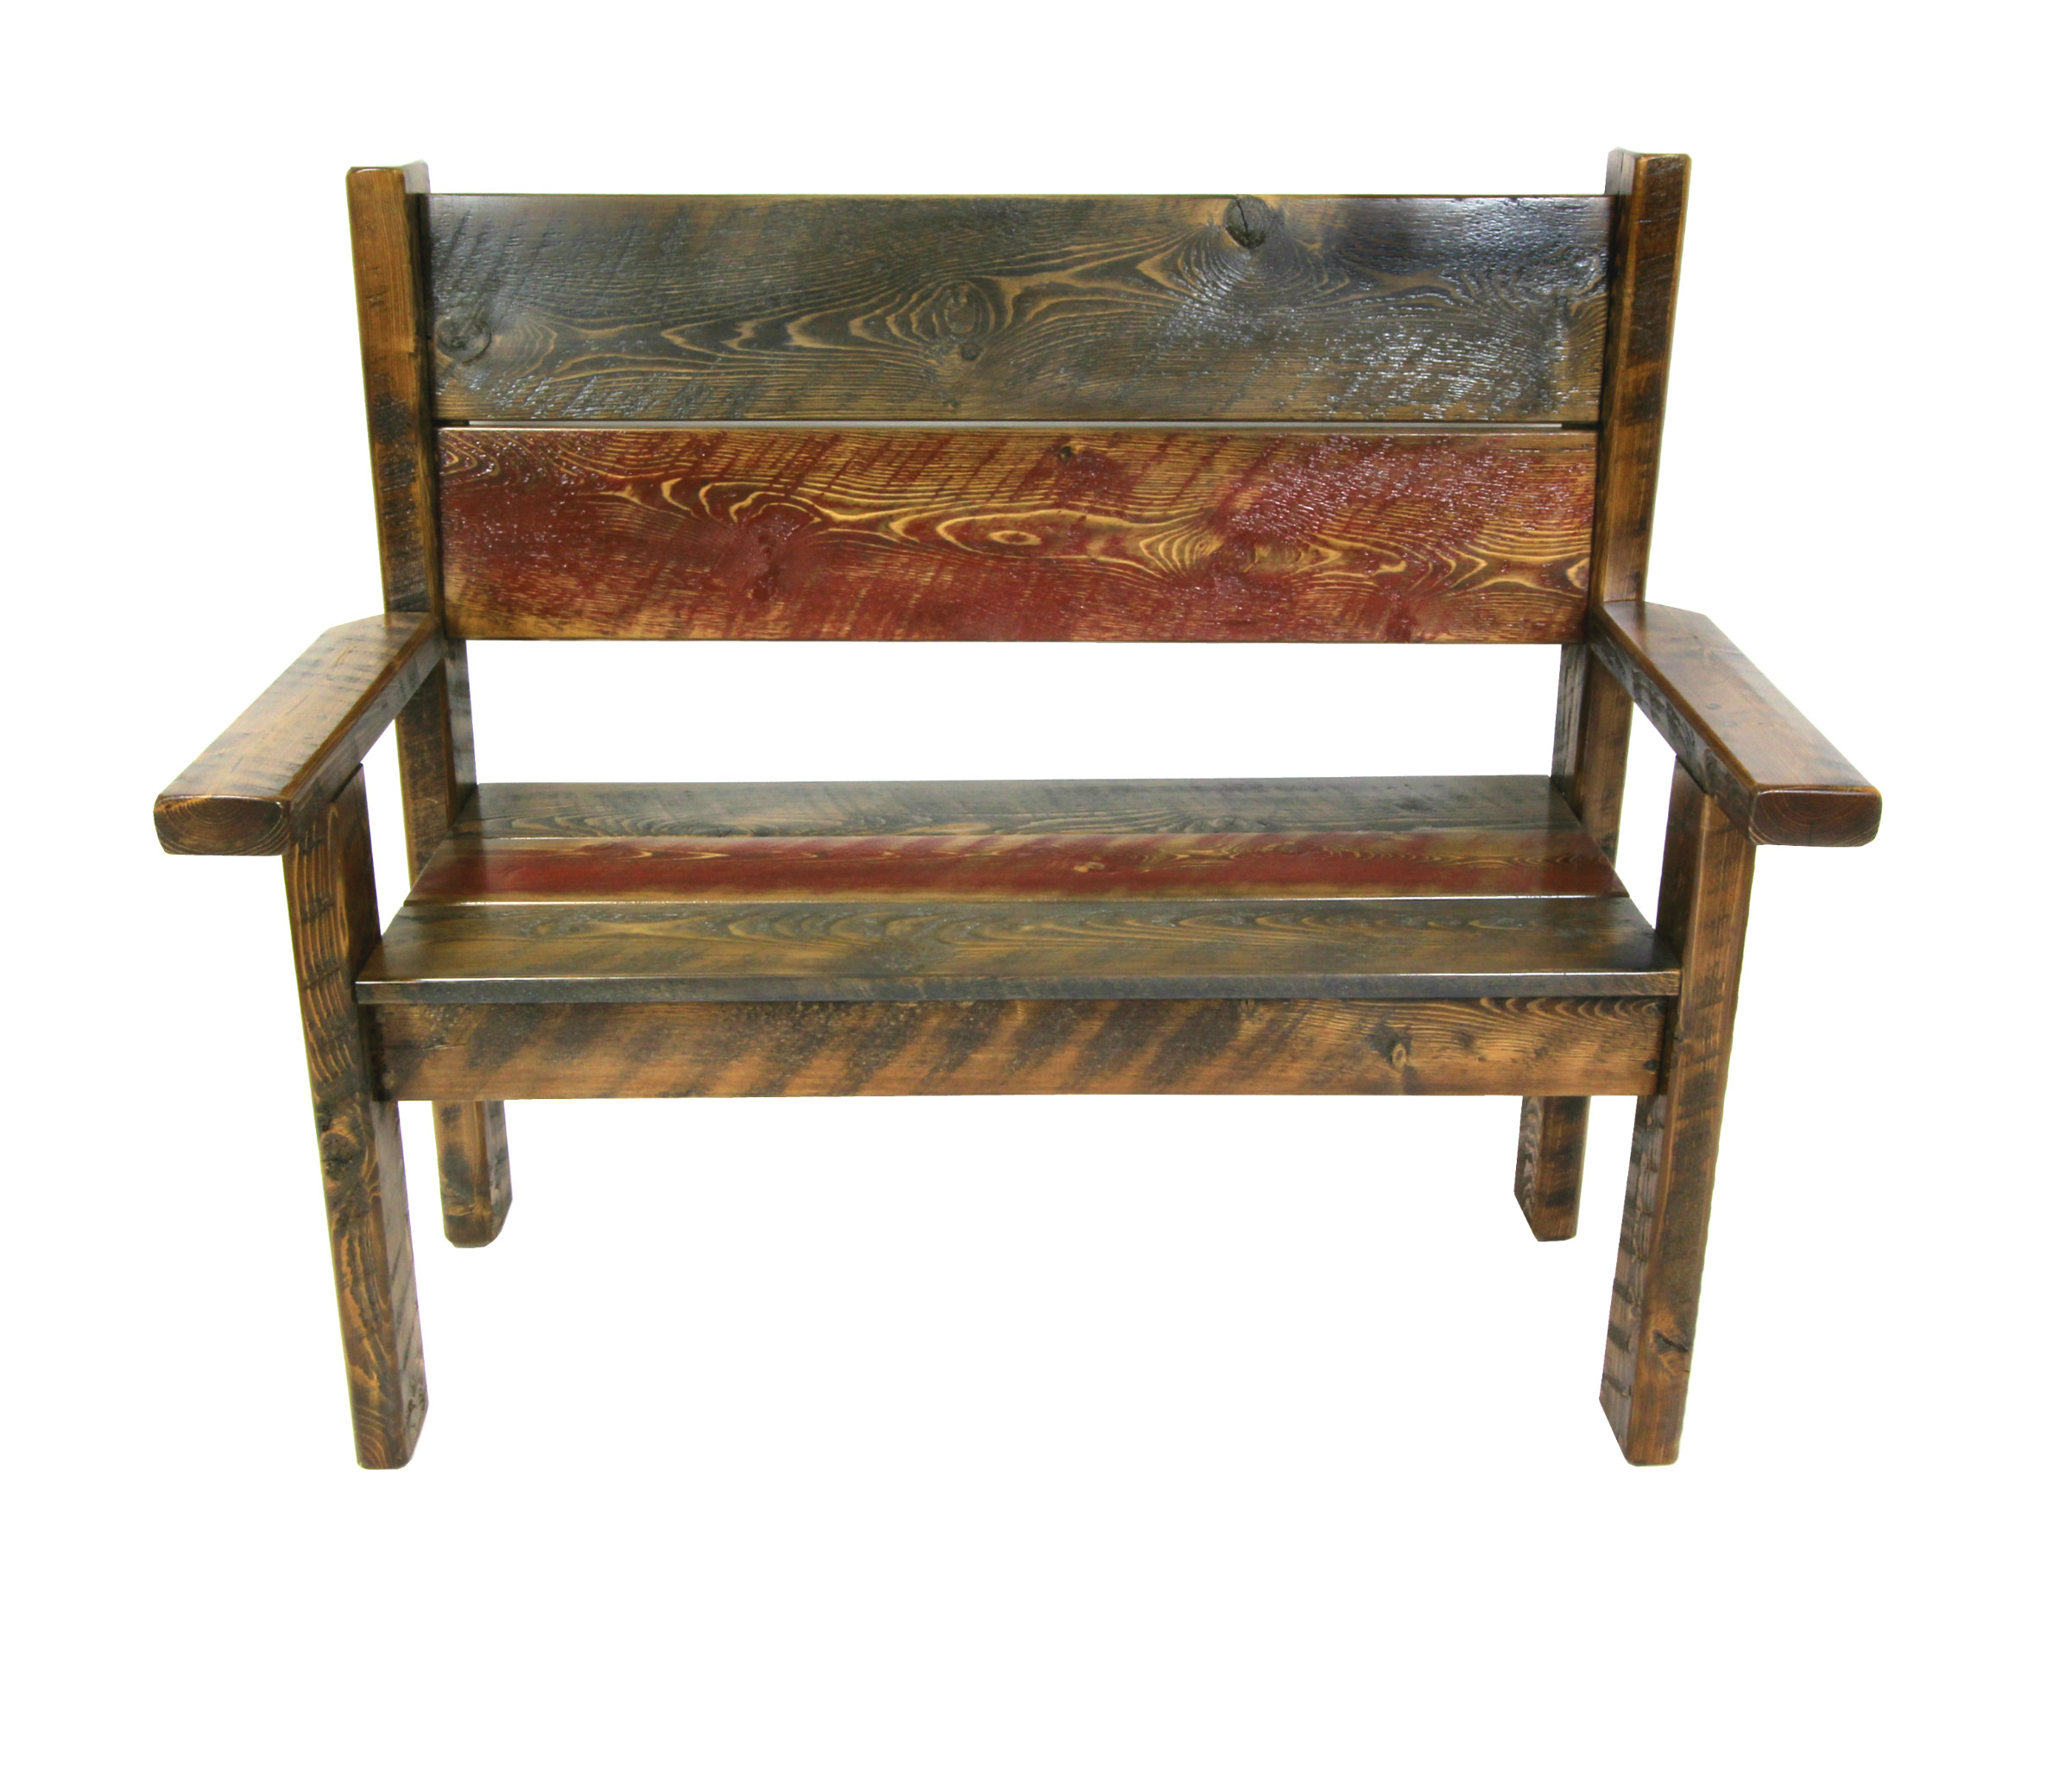 Rustic Bench Entry Bench Reclaimed Wood